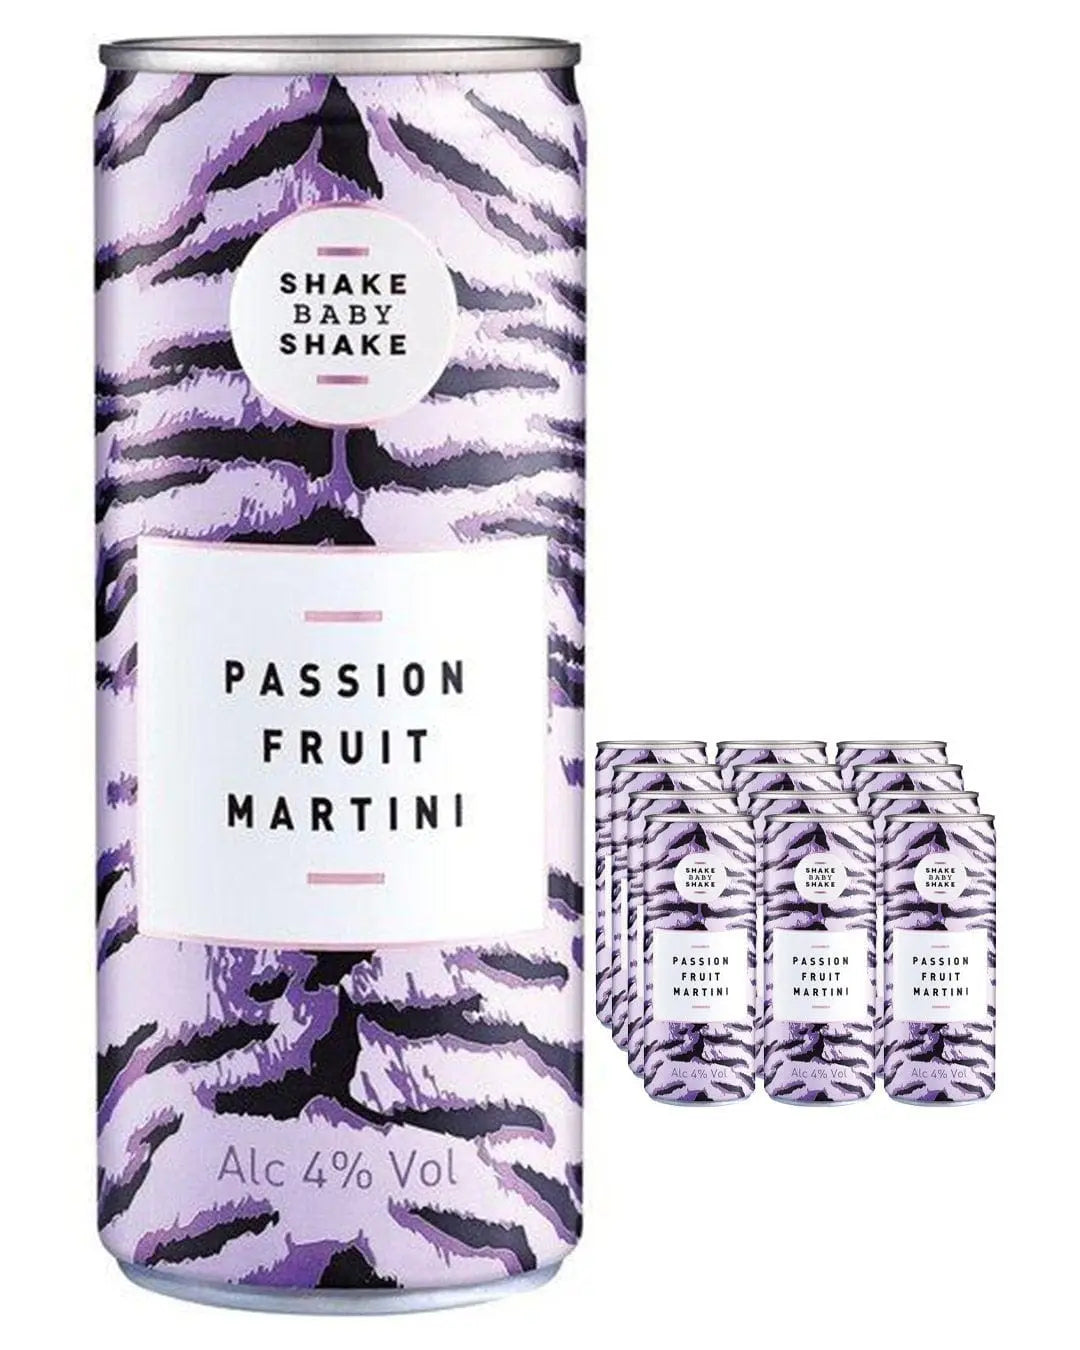 Shake Baby Shake Passion Fruit Martini Premixed Cocktail Multipack, 12 x 250 ml Ready Made Cocktails